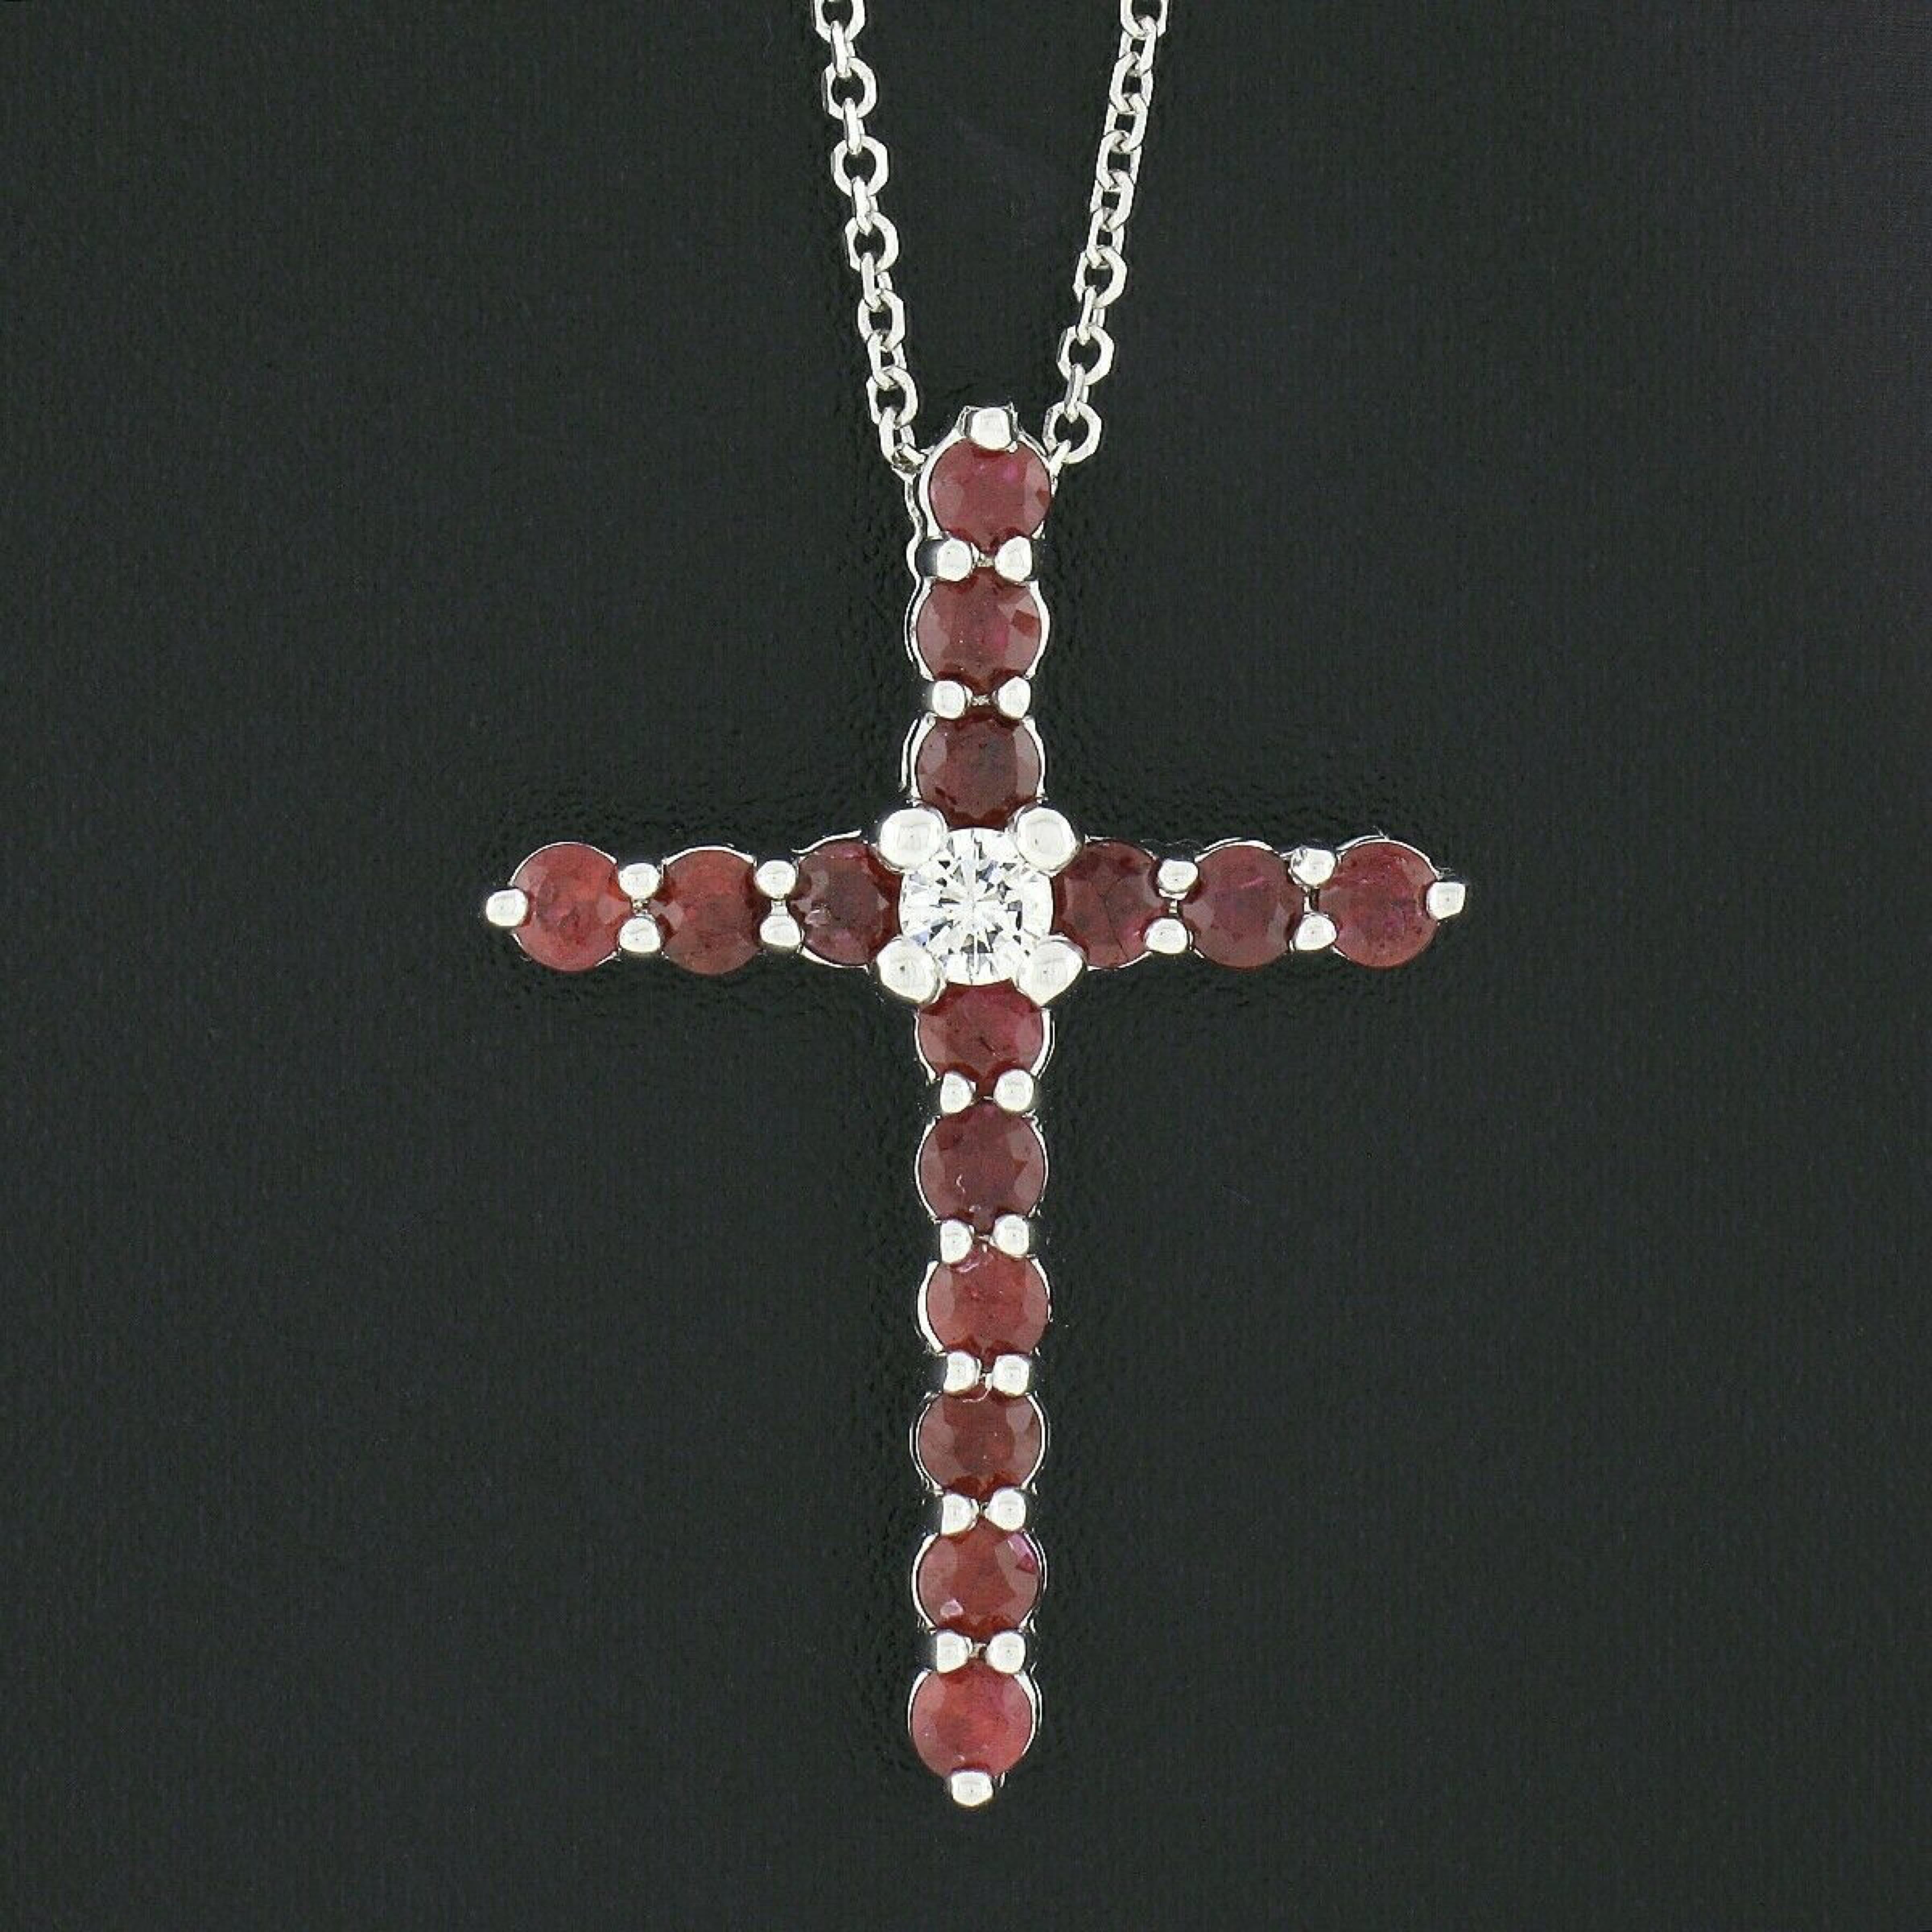 Here we have an incredible cross pendant necklace that is newly crafted from solid 14k white gold and is neatly set with gorgeous rubies throughout and a fine diamond at the center. The round brilliant cut rubies show an absolutely stunning deep red